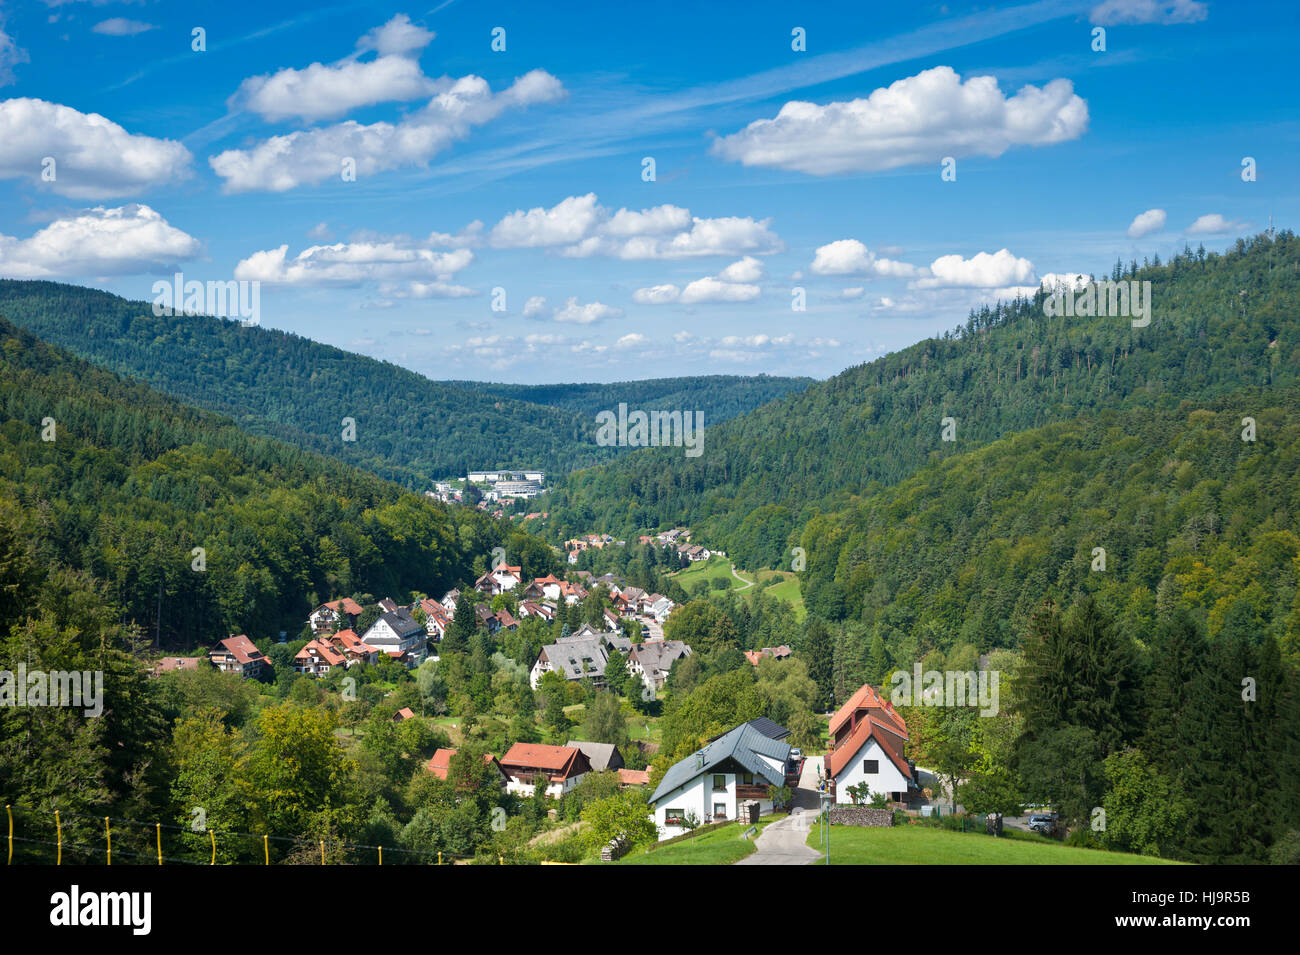 hill, europe, townscape, meadows, woods, forested, sight, view, outlook, Stock Photo